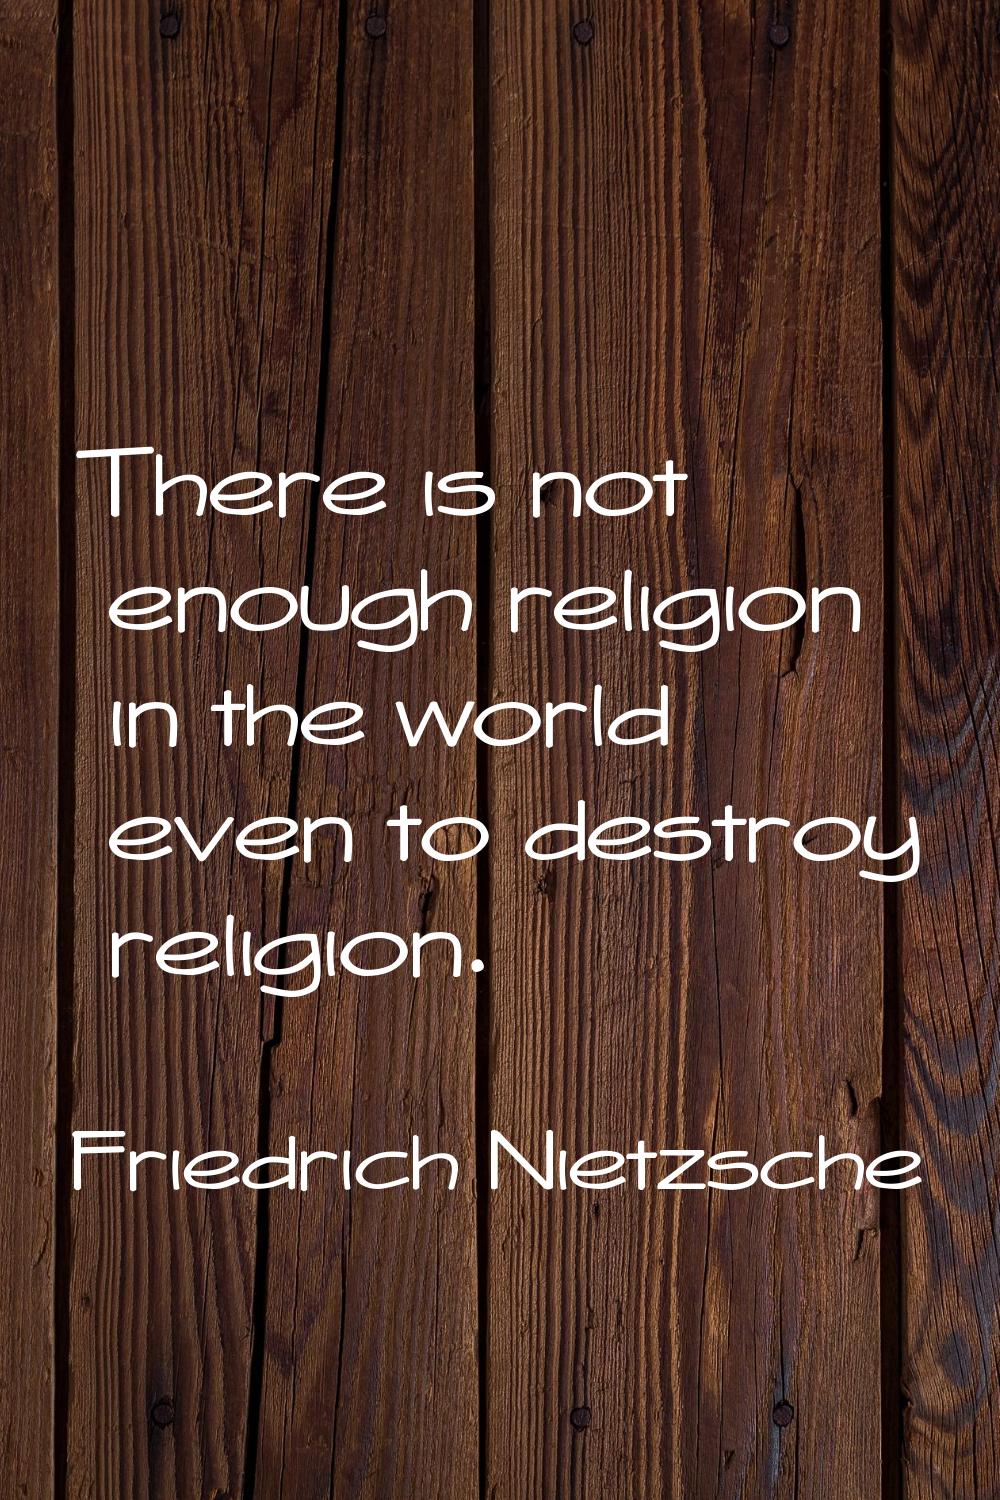 There is not enough religion in the world even to destroy religion.